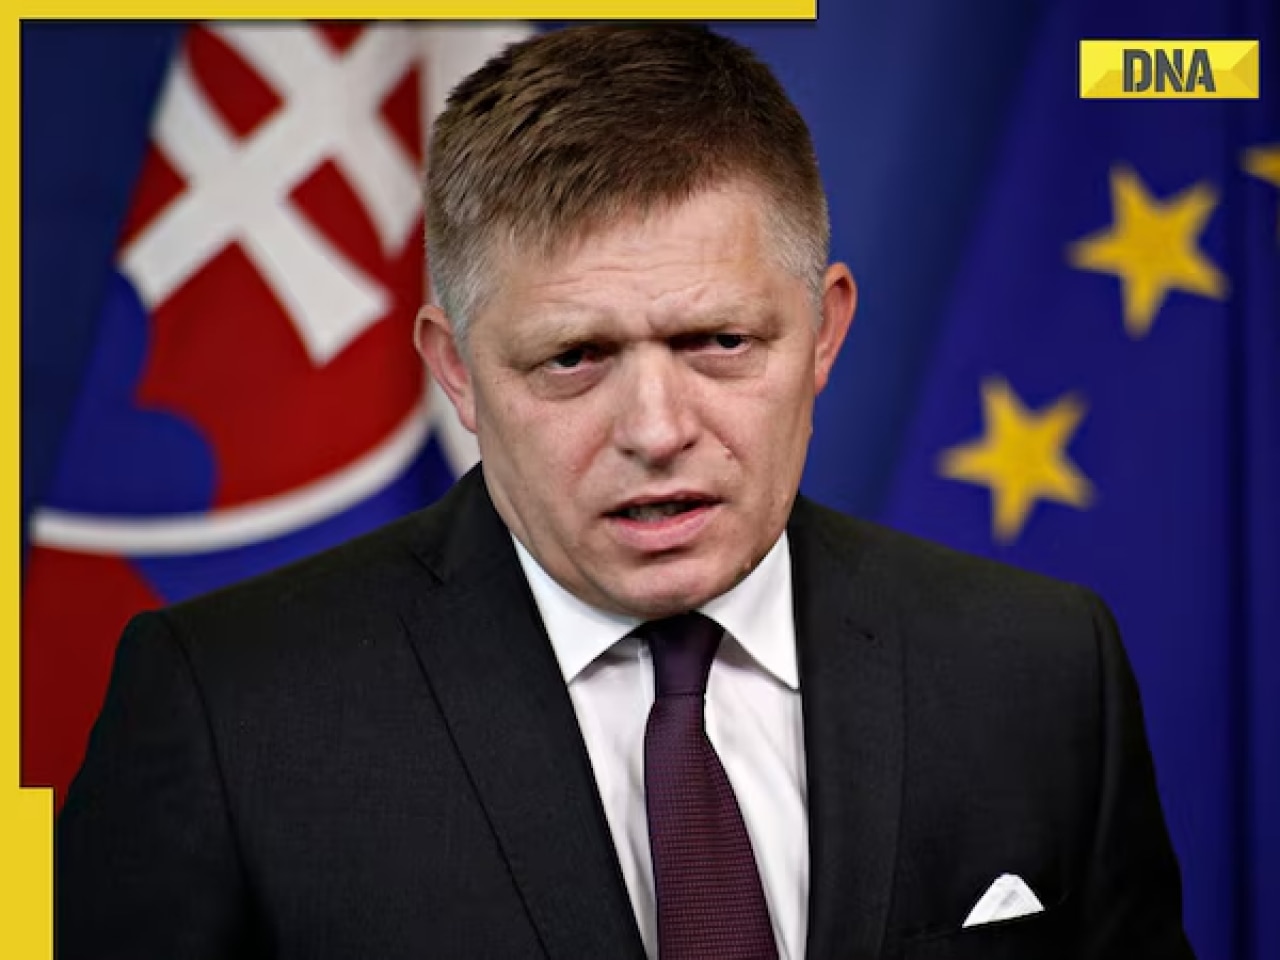 Hungarian PM says Slovakia's PM Robert Fico is 'between life and death' 2 days after assassination attempt